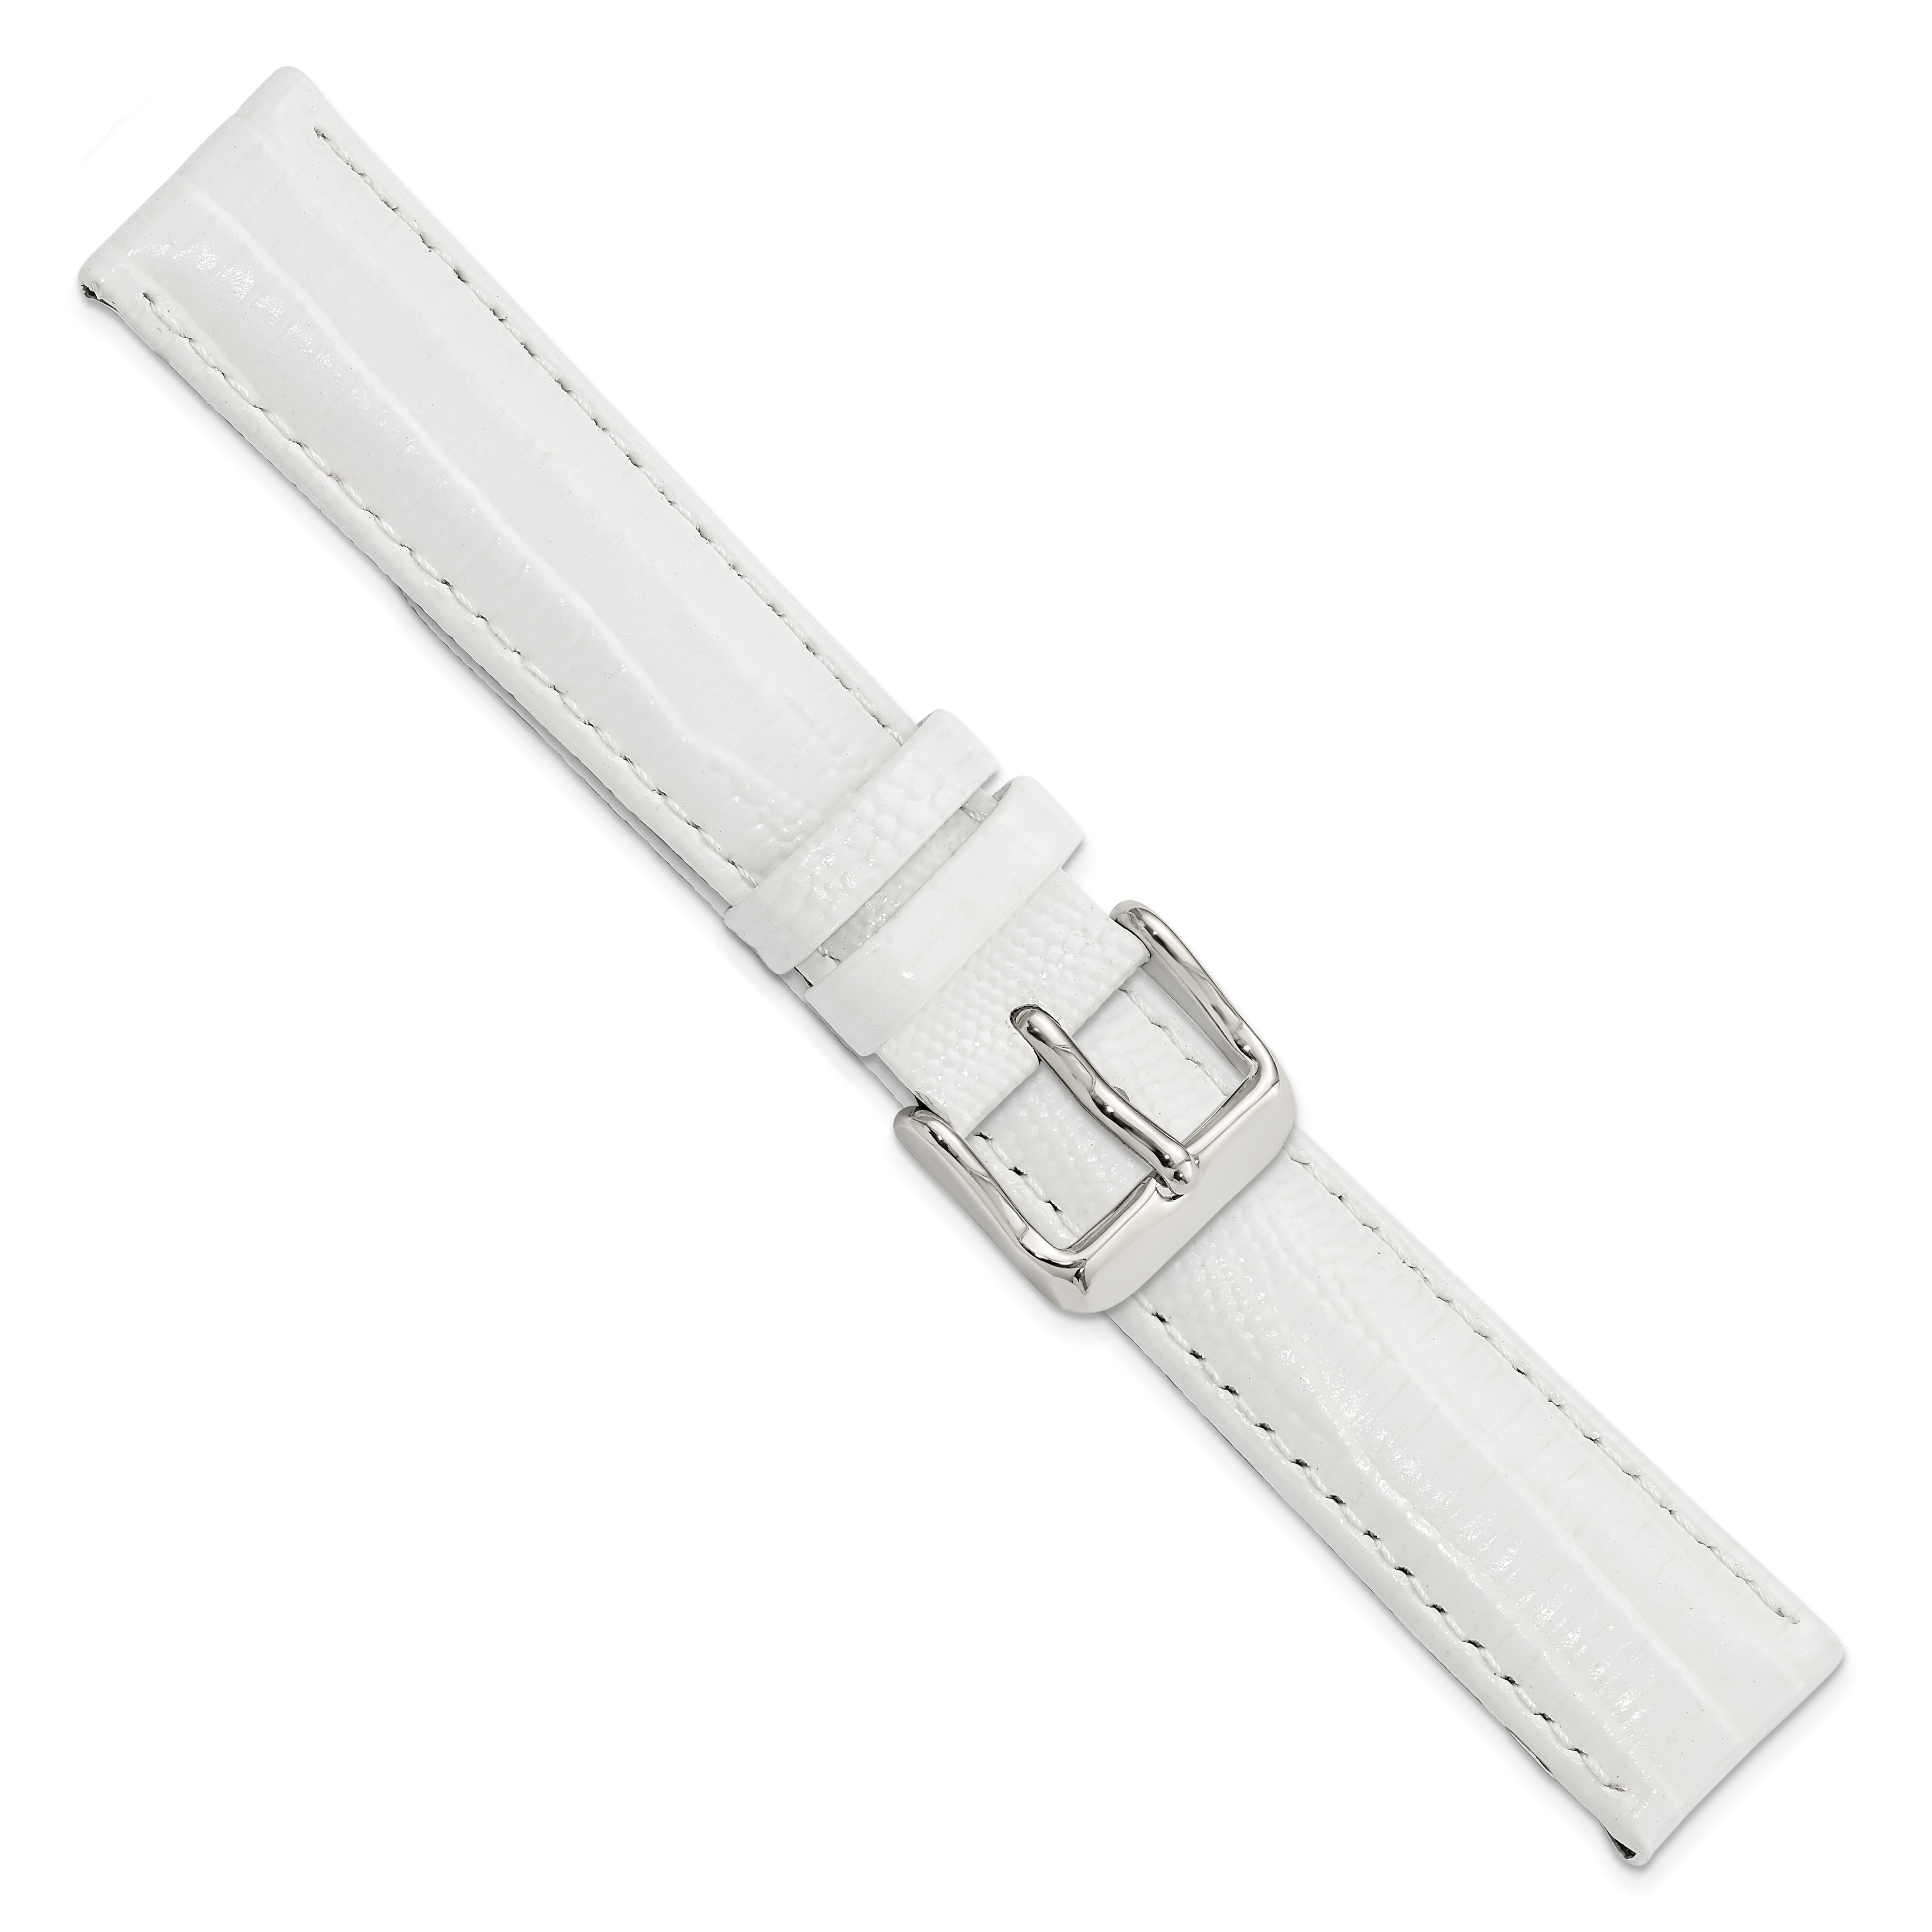 14mm White Teju Liz Grain Leather with Silver-tone Buckle 6.75 inch Watch Band